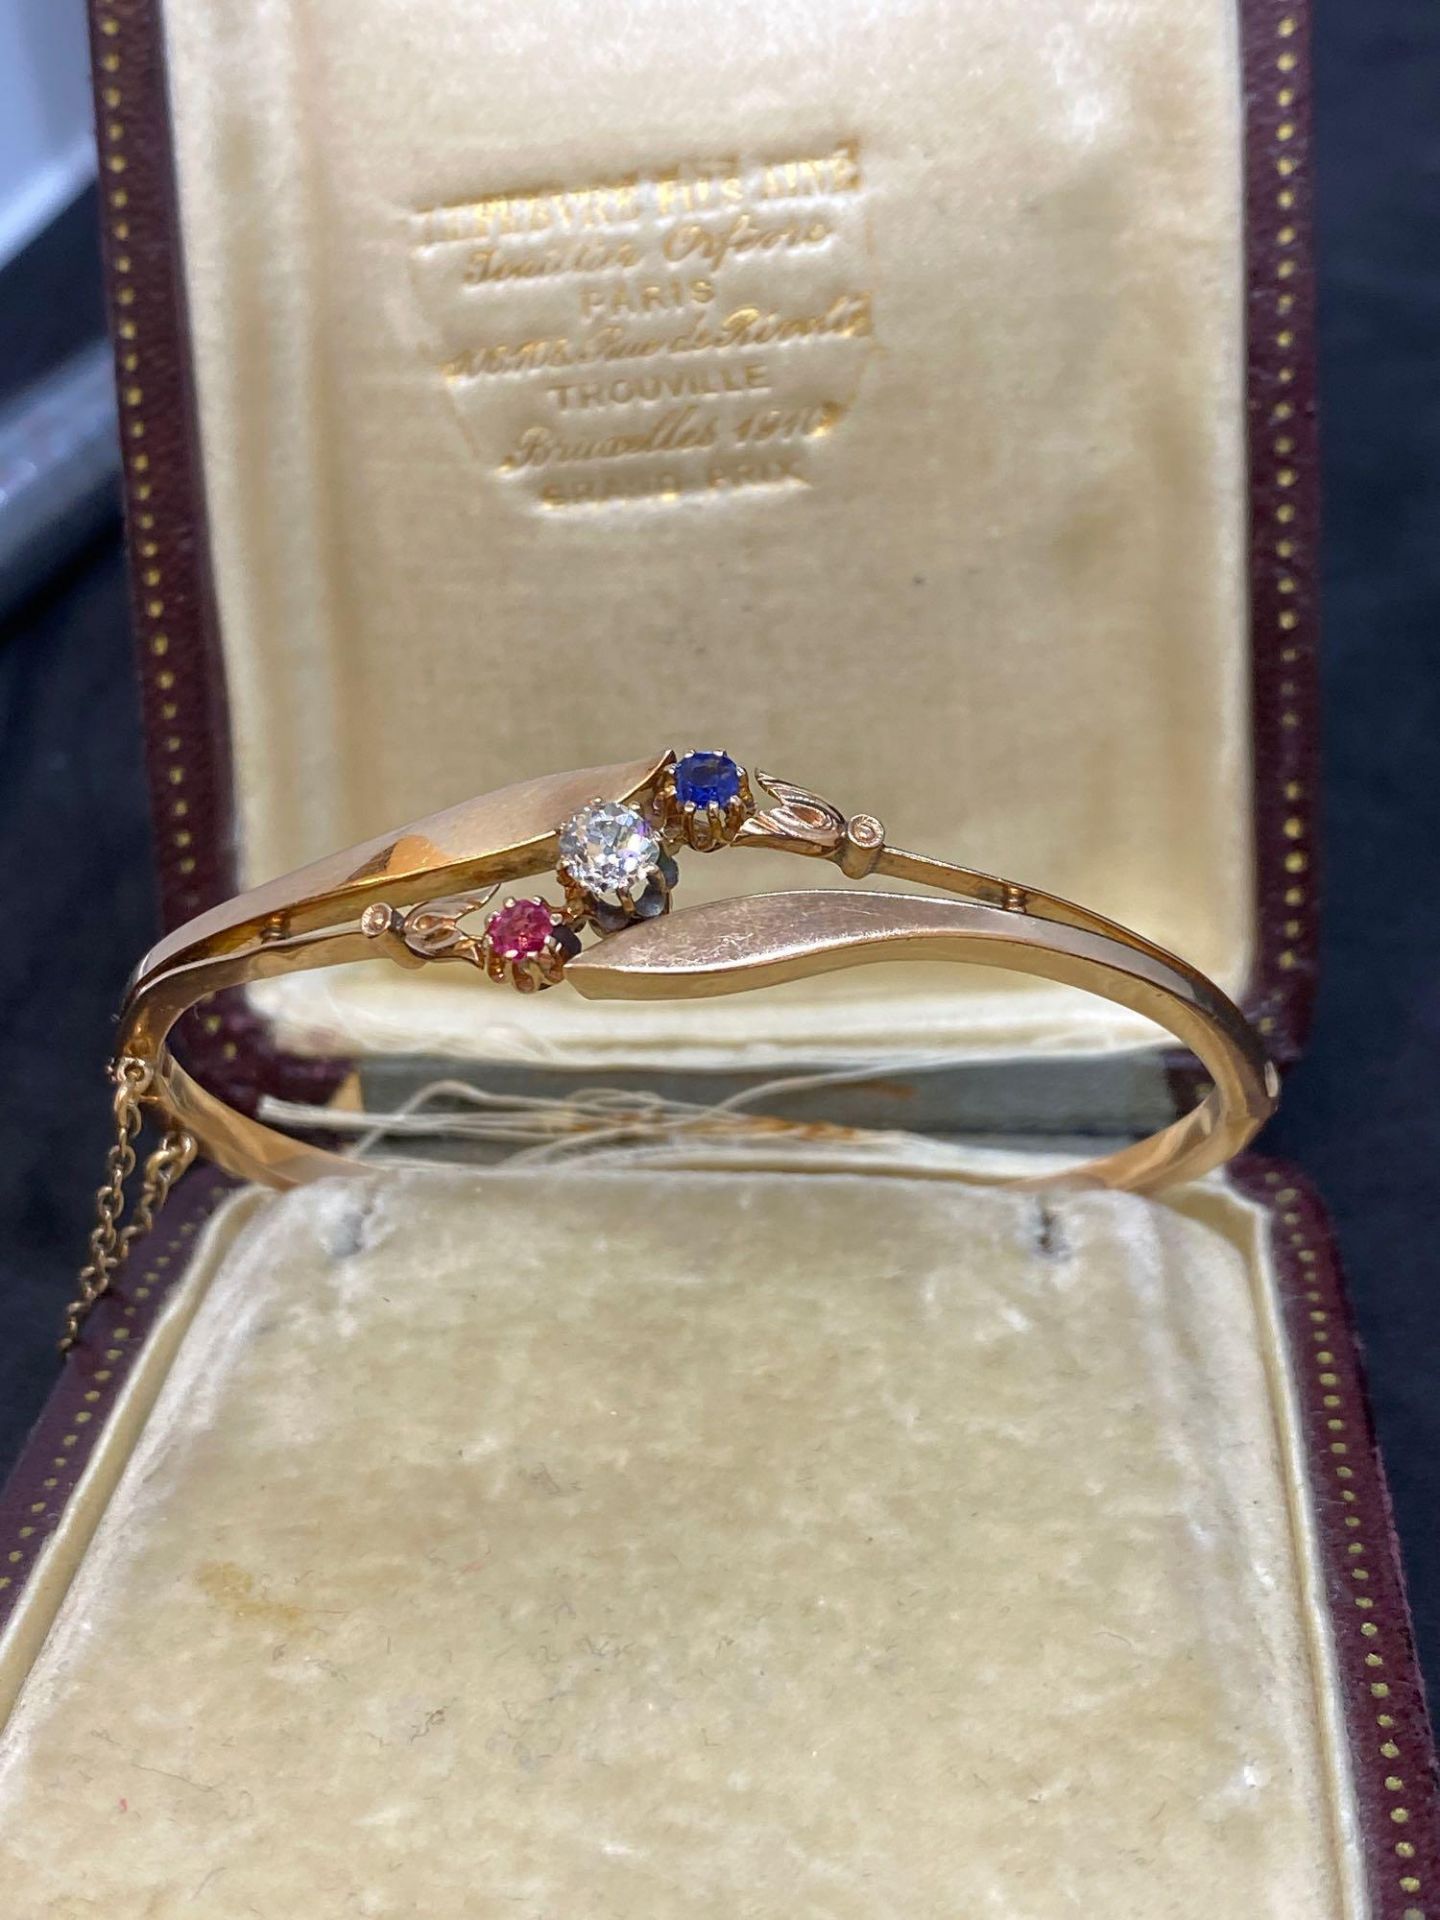 Antique Rose Gold Hinged Bangle Set with Sapphire, Diamond and Ruby - 7.3 Grams - Image 2 of 4